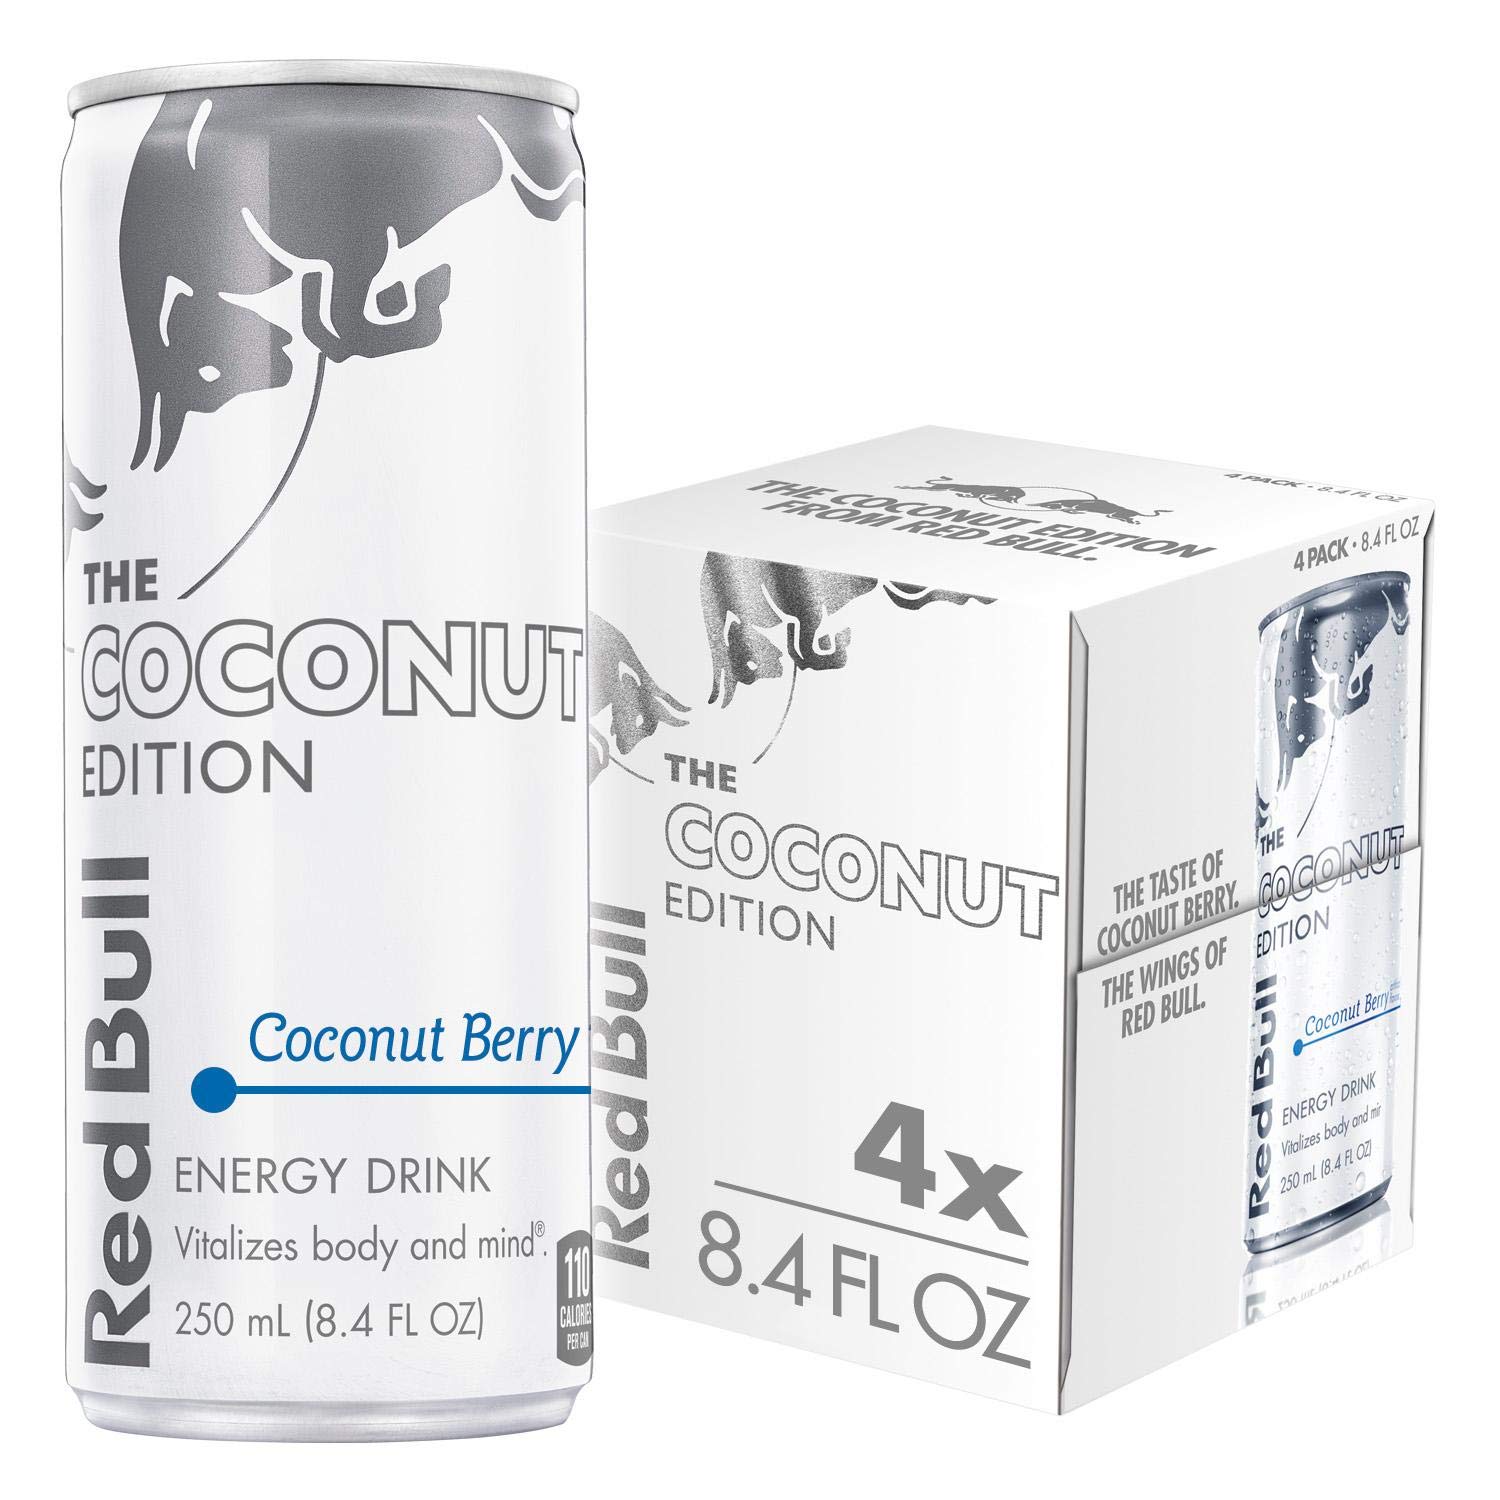 4-Pack 8.4-Oz Red Bull Energy Drink (Coconut Edition) $3.55 w/ Subscribe & Save